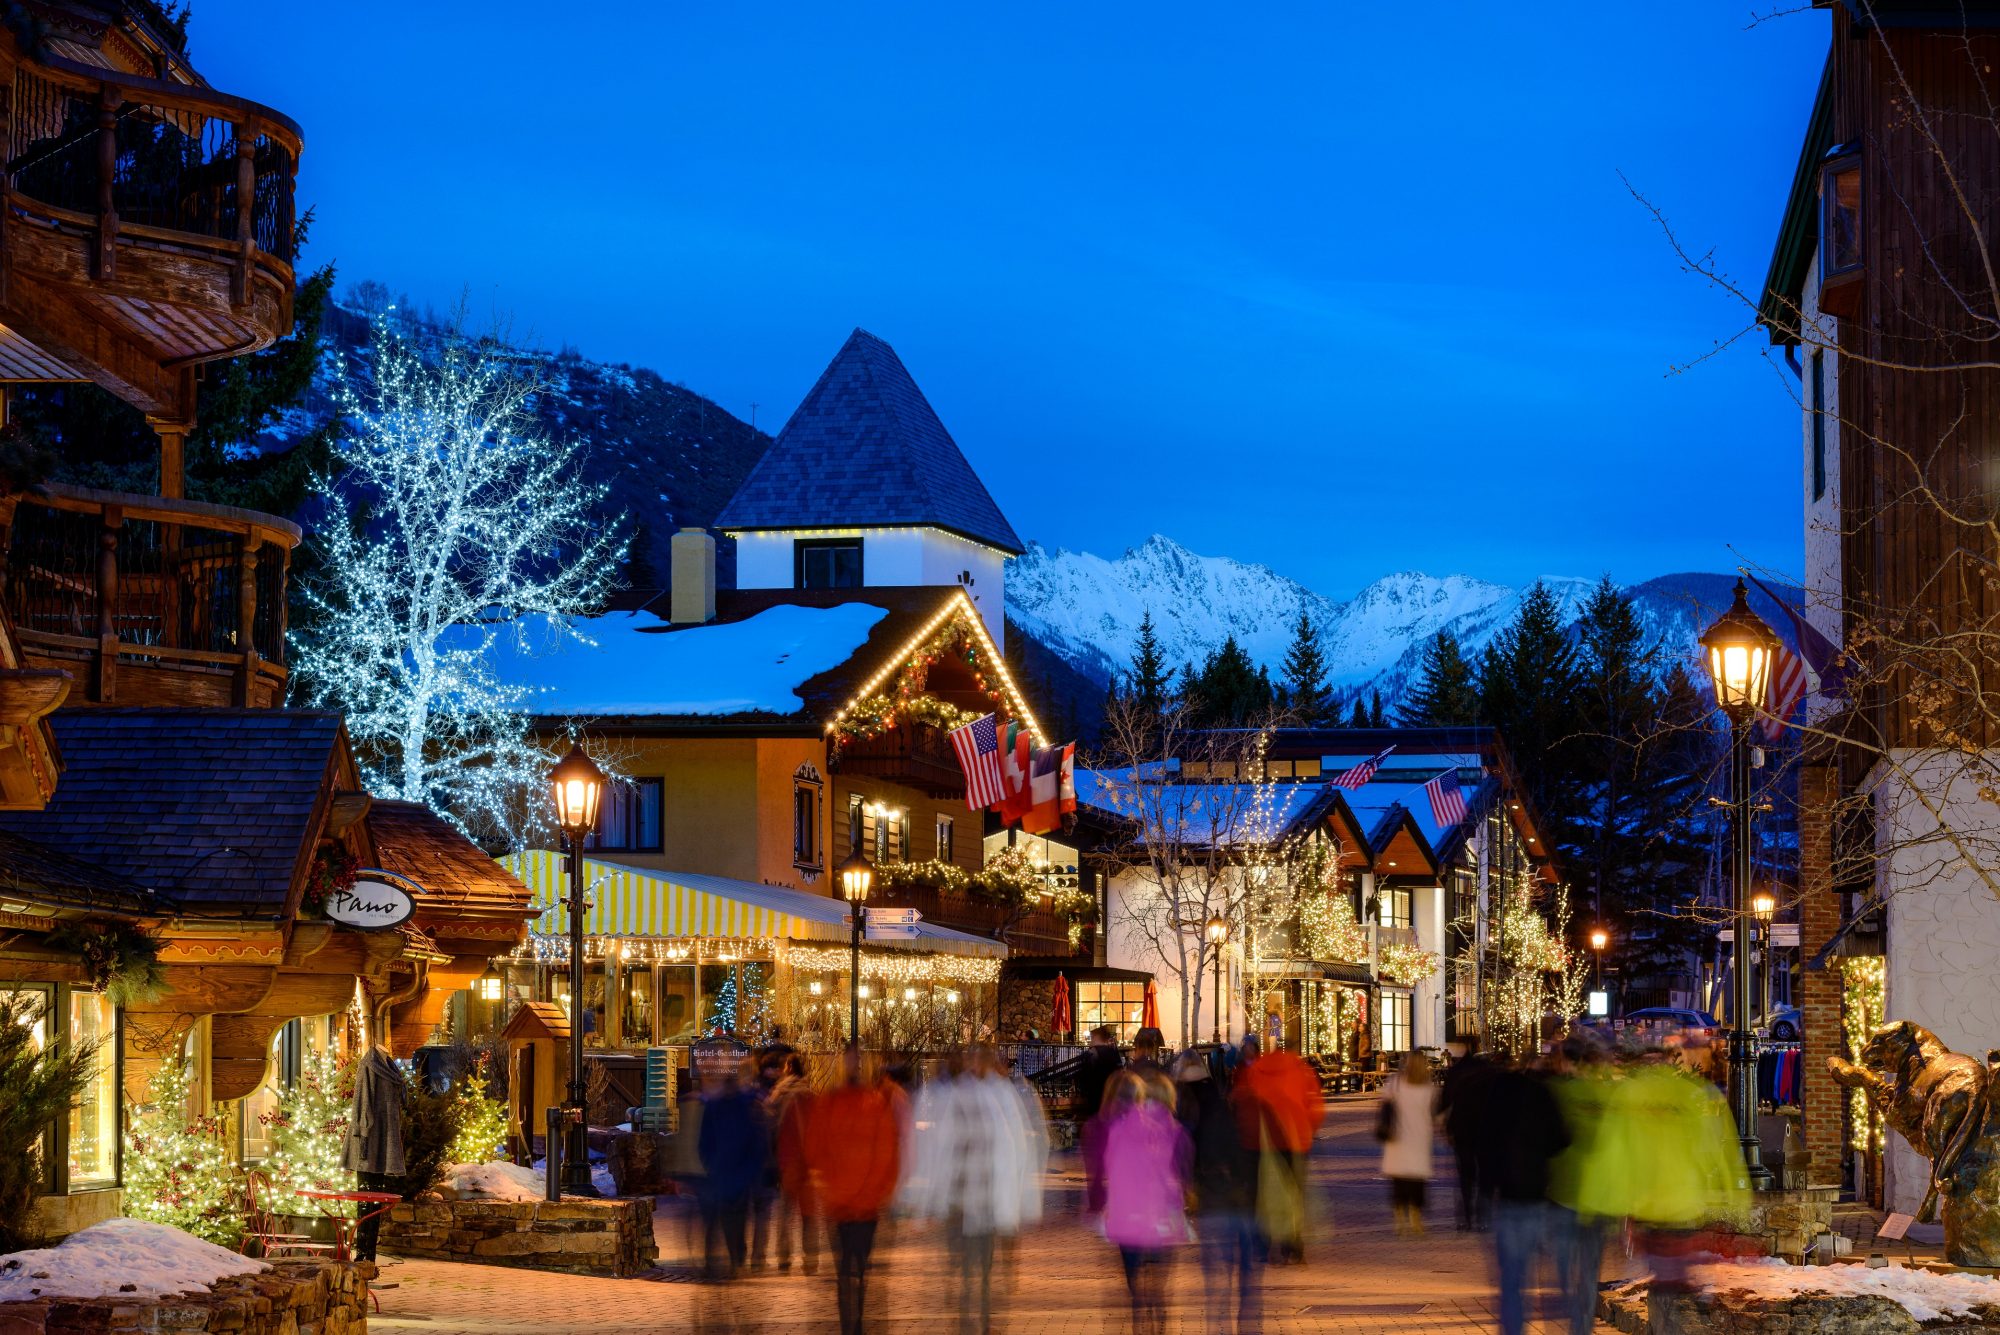 Vail Village. Photo: Chris McLennan- Vail Resorts. Vail Resorts Ceo Rob Katz Gives $2 Million in Grants to Support Mental & Behavioral Health Programs in Mountain Resort Communities across North America.